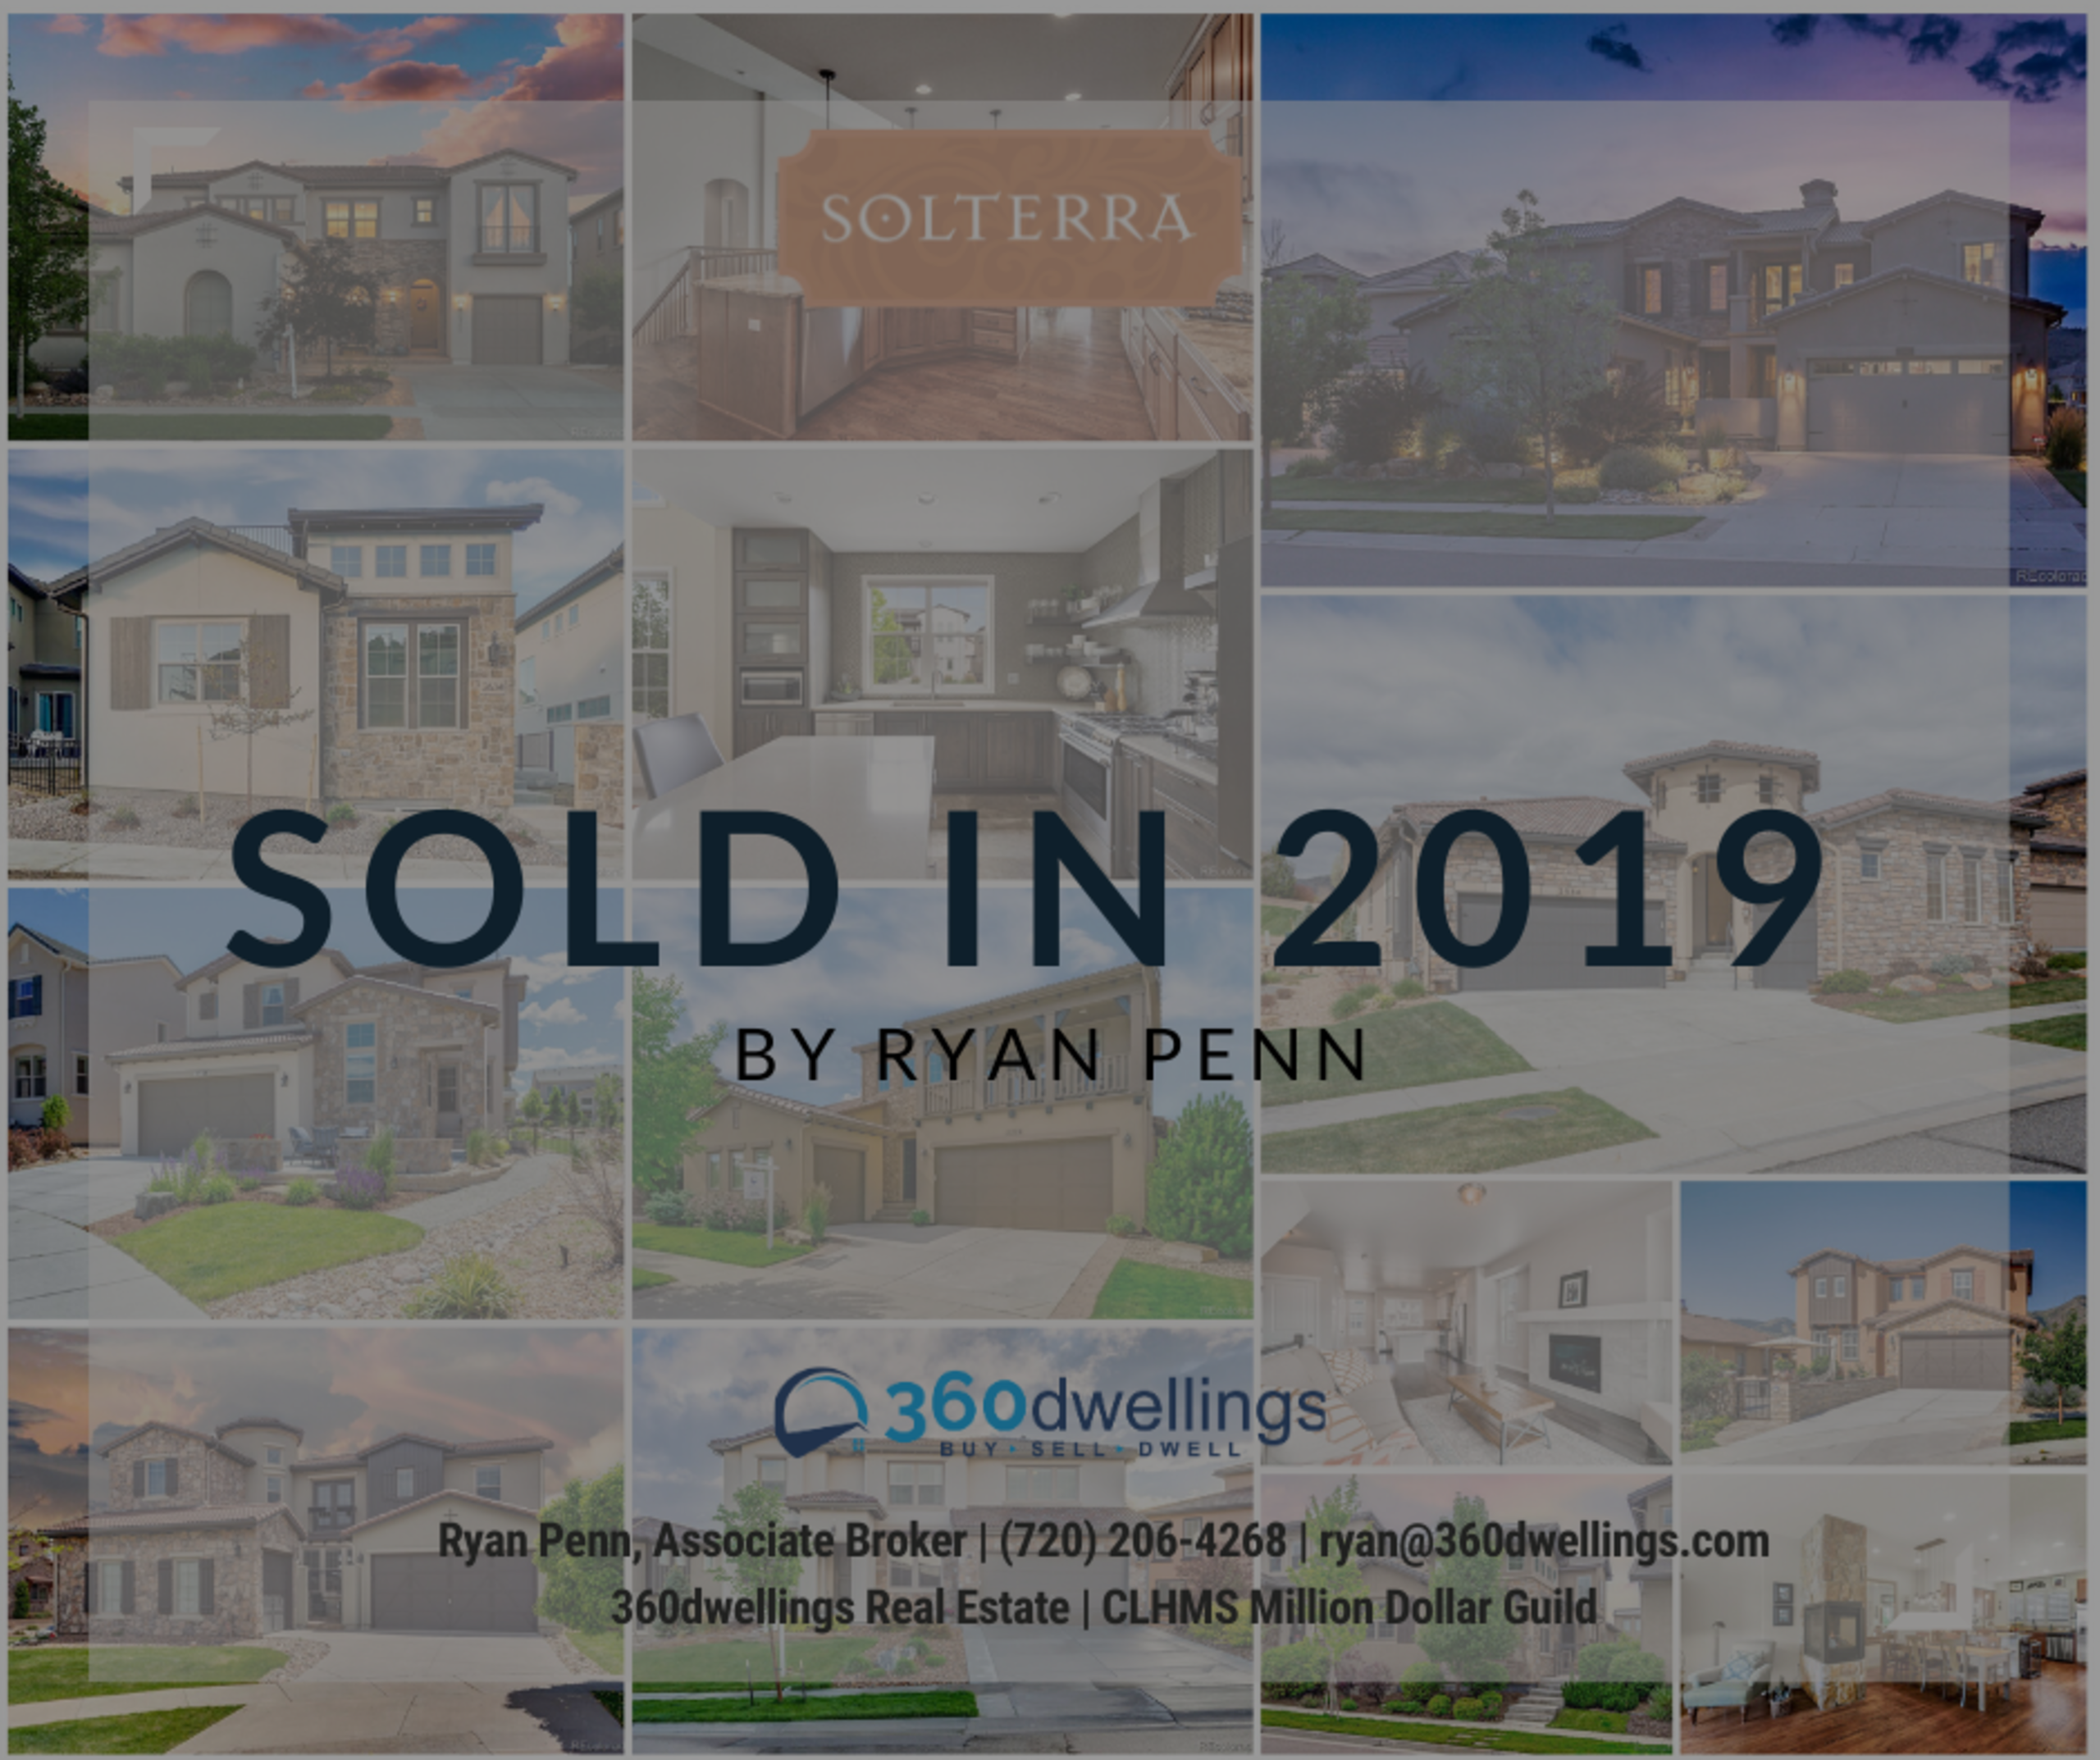 Ryan Penn Top Selling Solterra Real Estate Agent